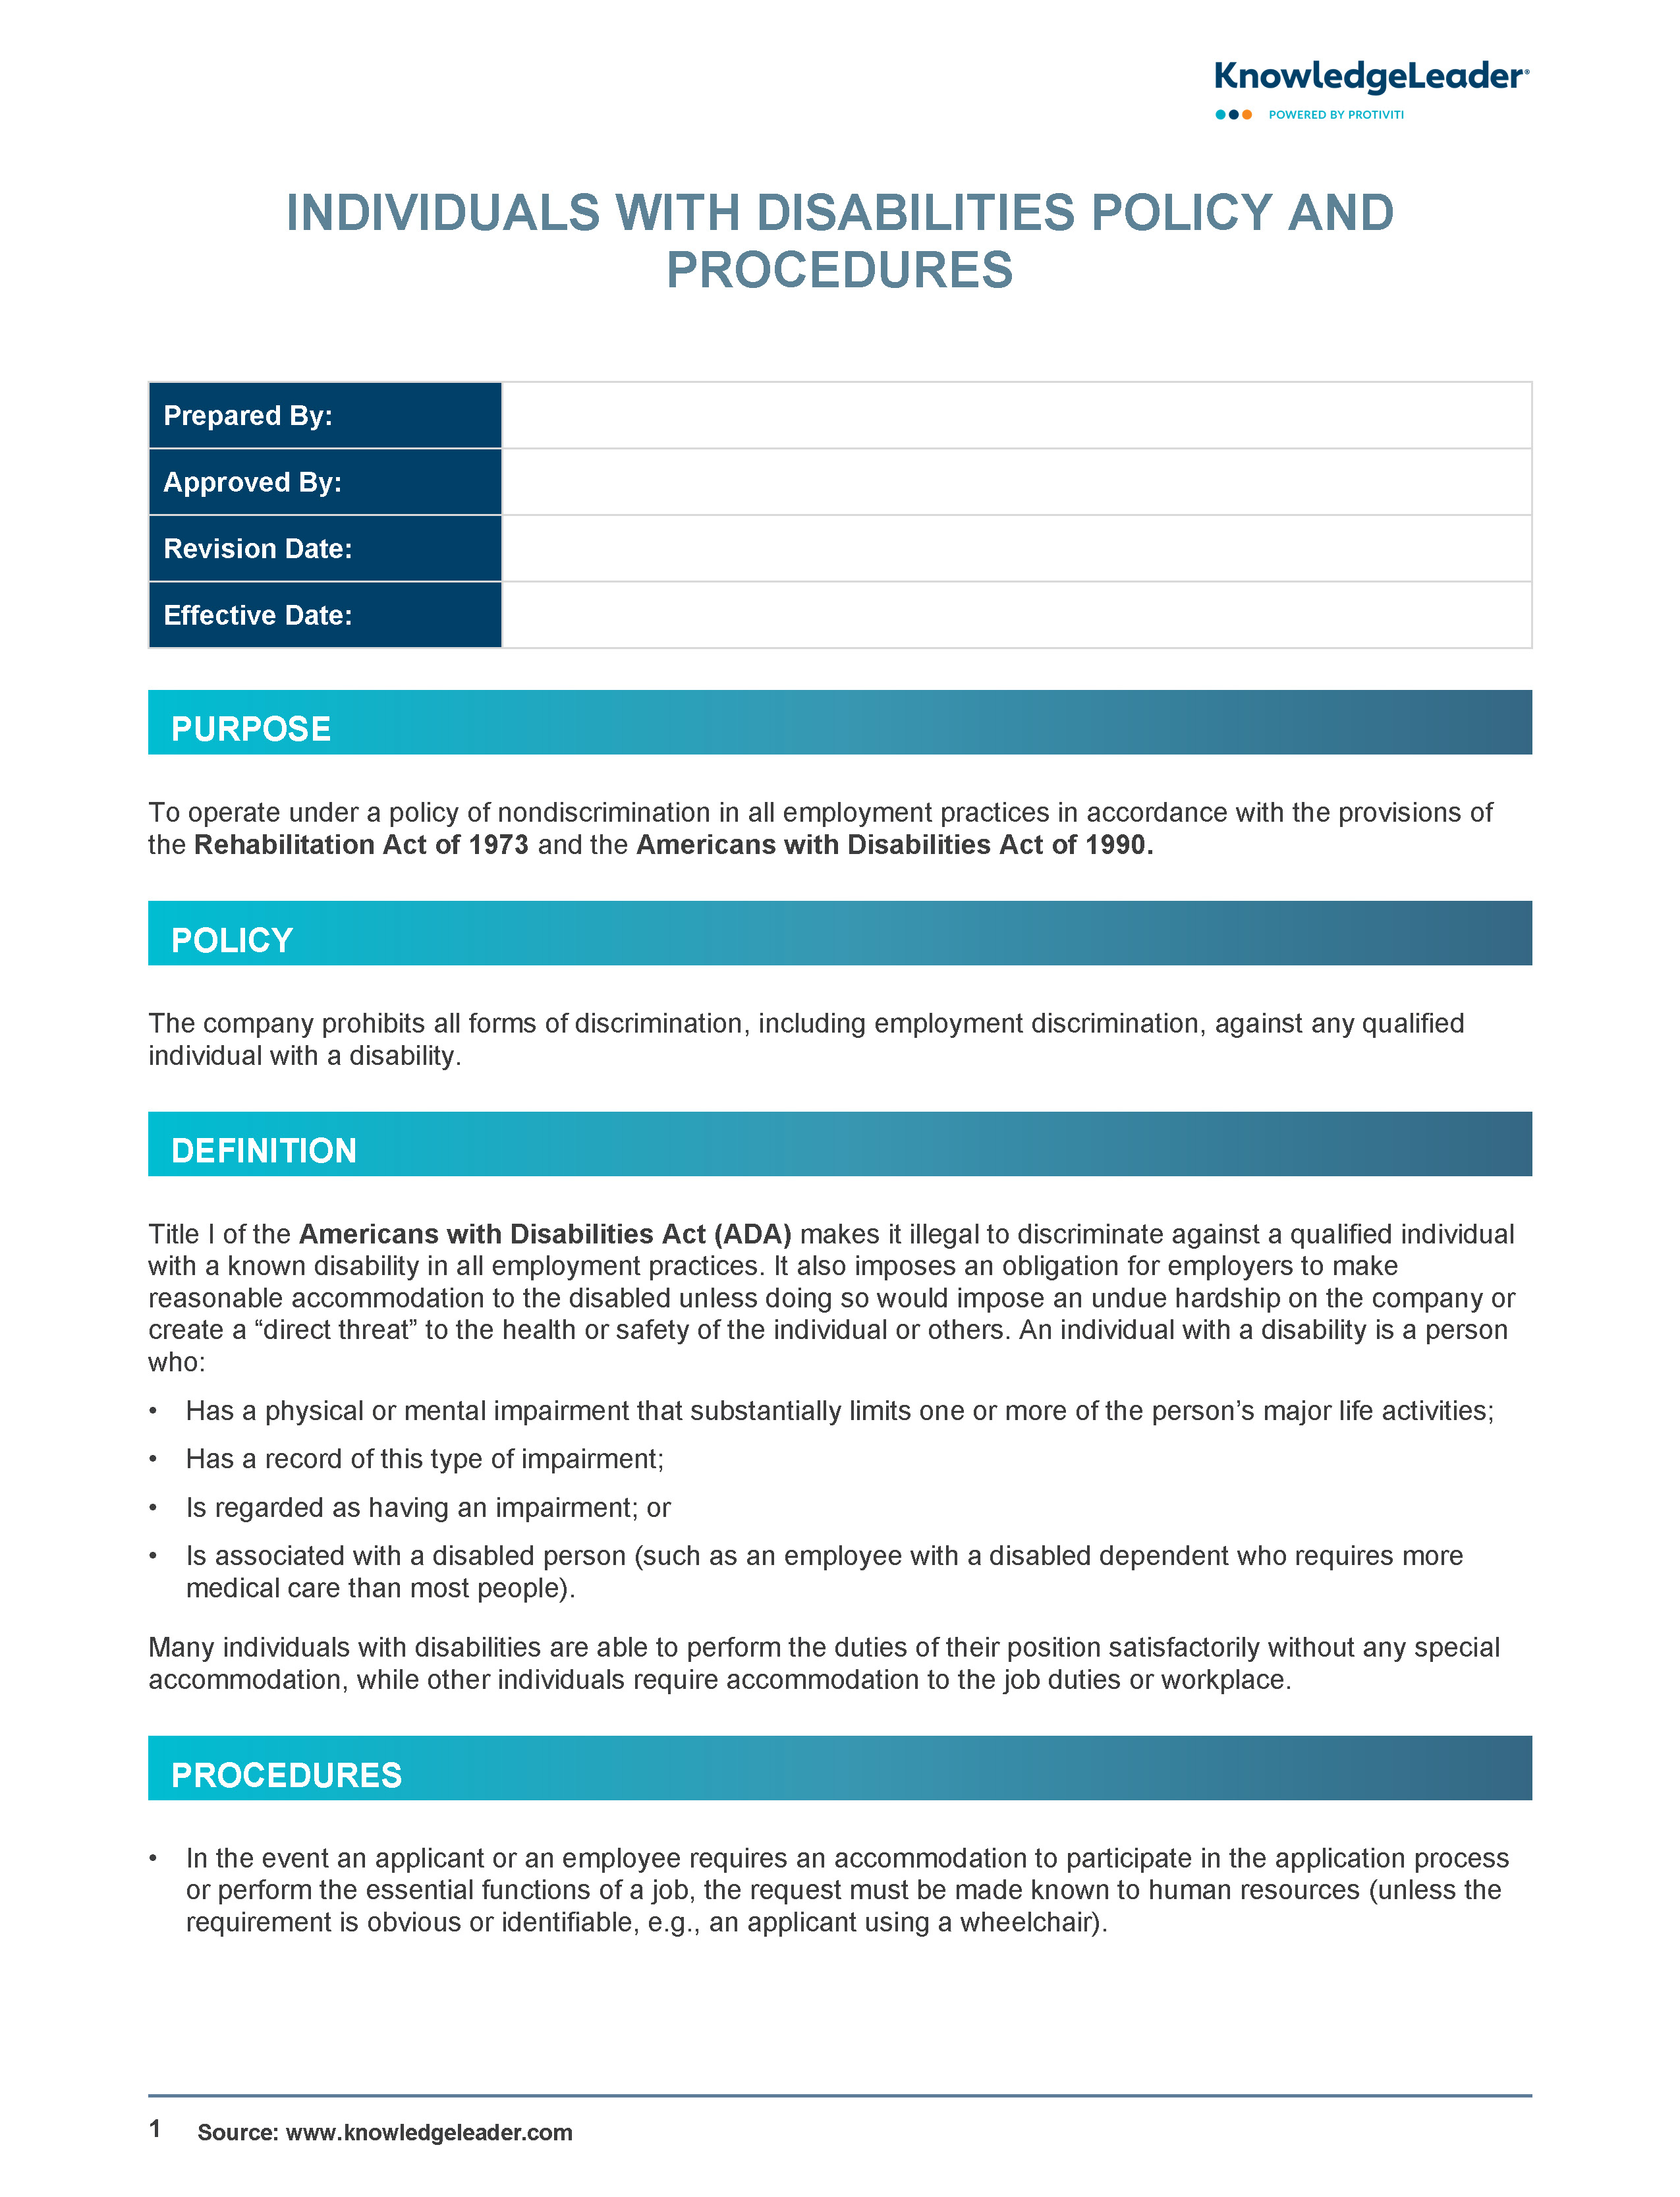 Screenshot of the first page of Individuals With Disabilities Policy and Procedures